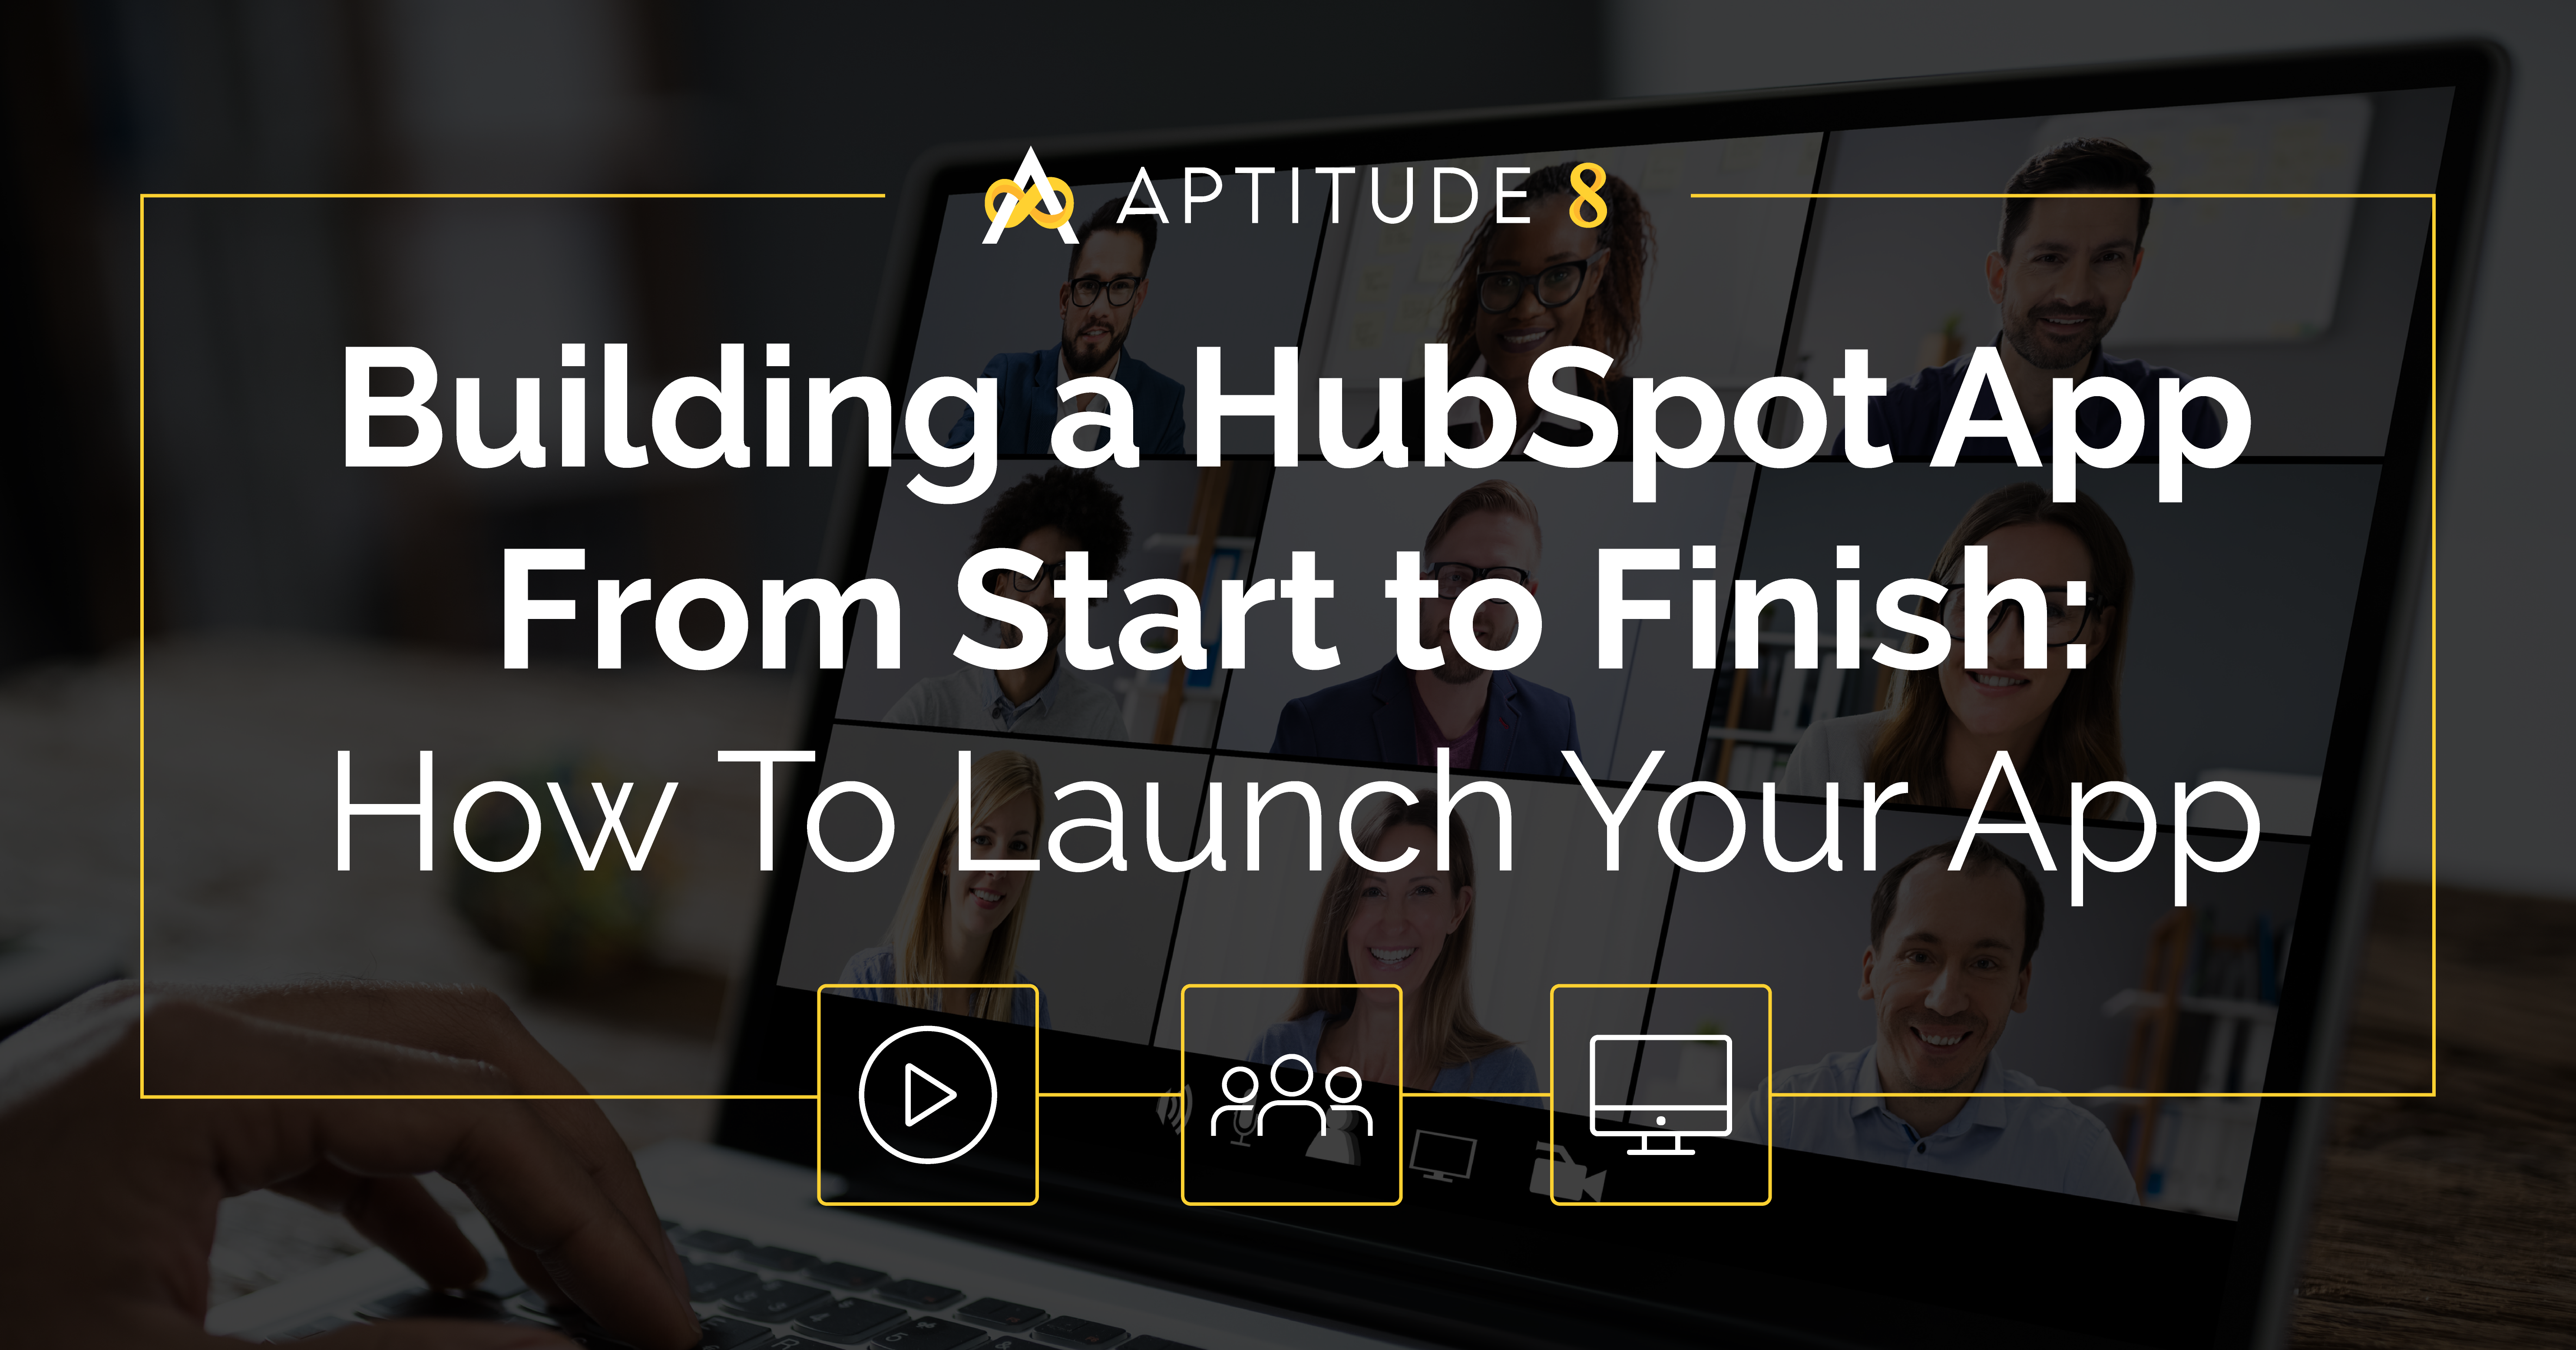 Building A HubSpot App From Start to Finish - Session 3